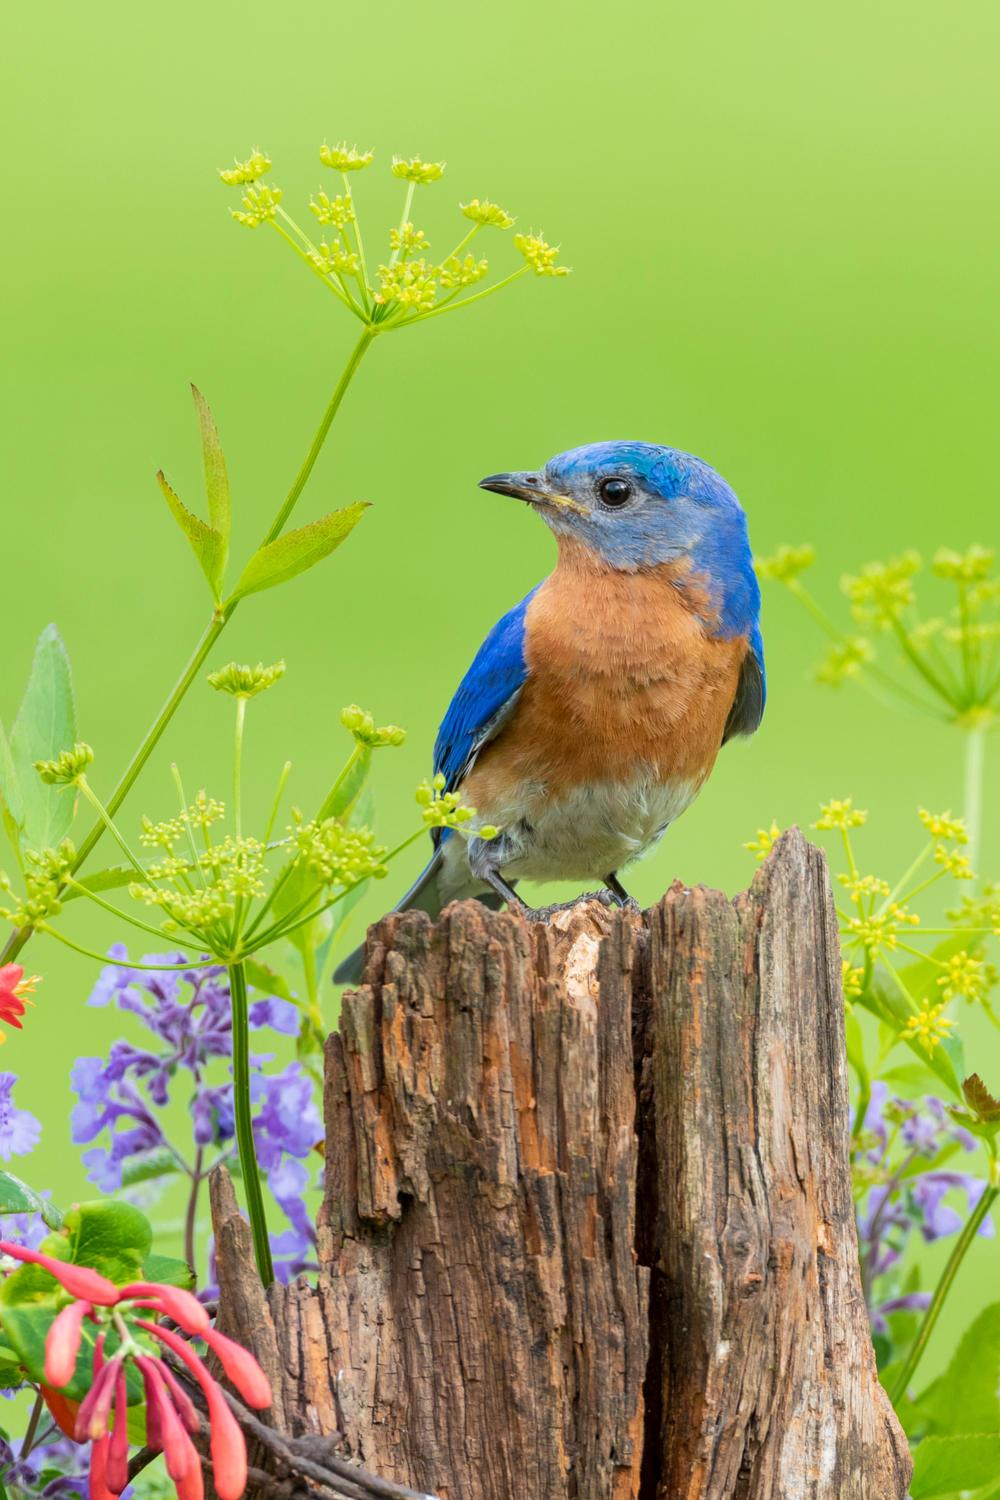 What does it mean if you see a bluebird